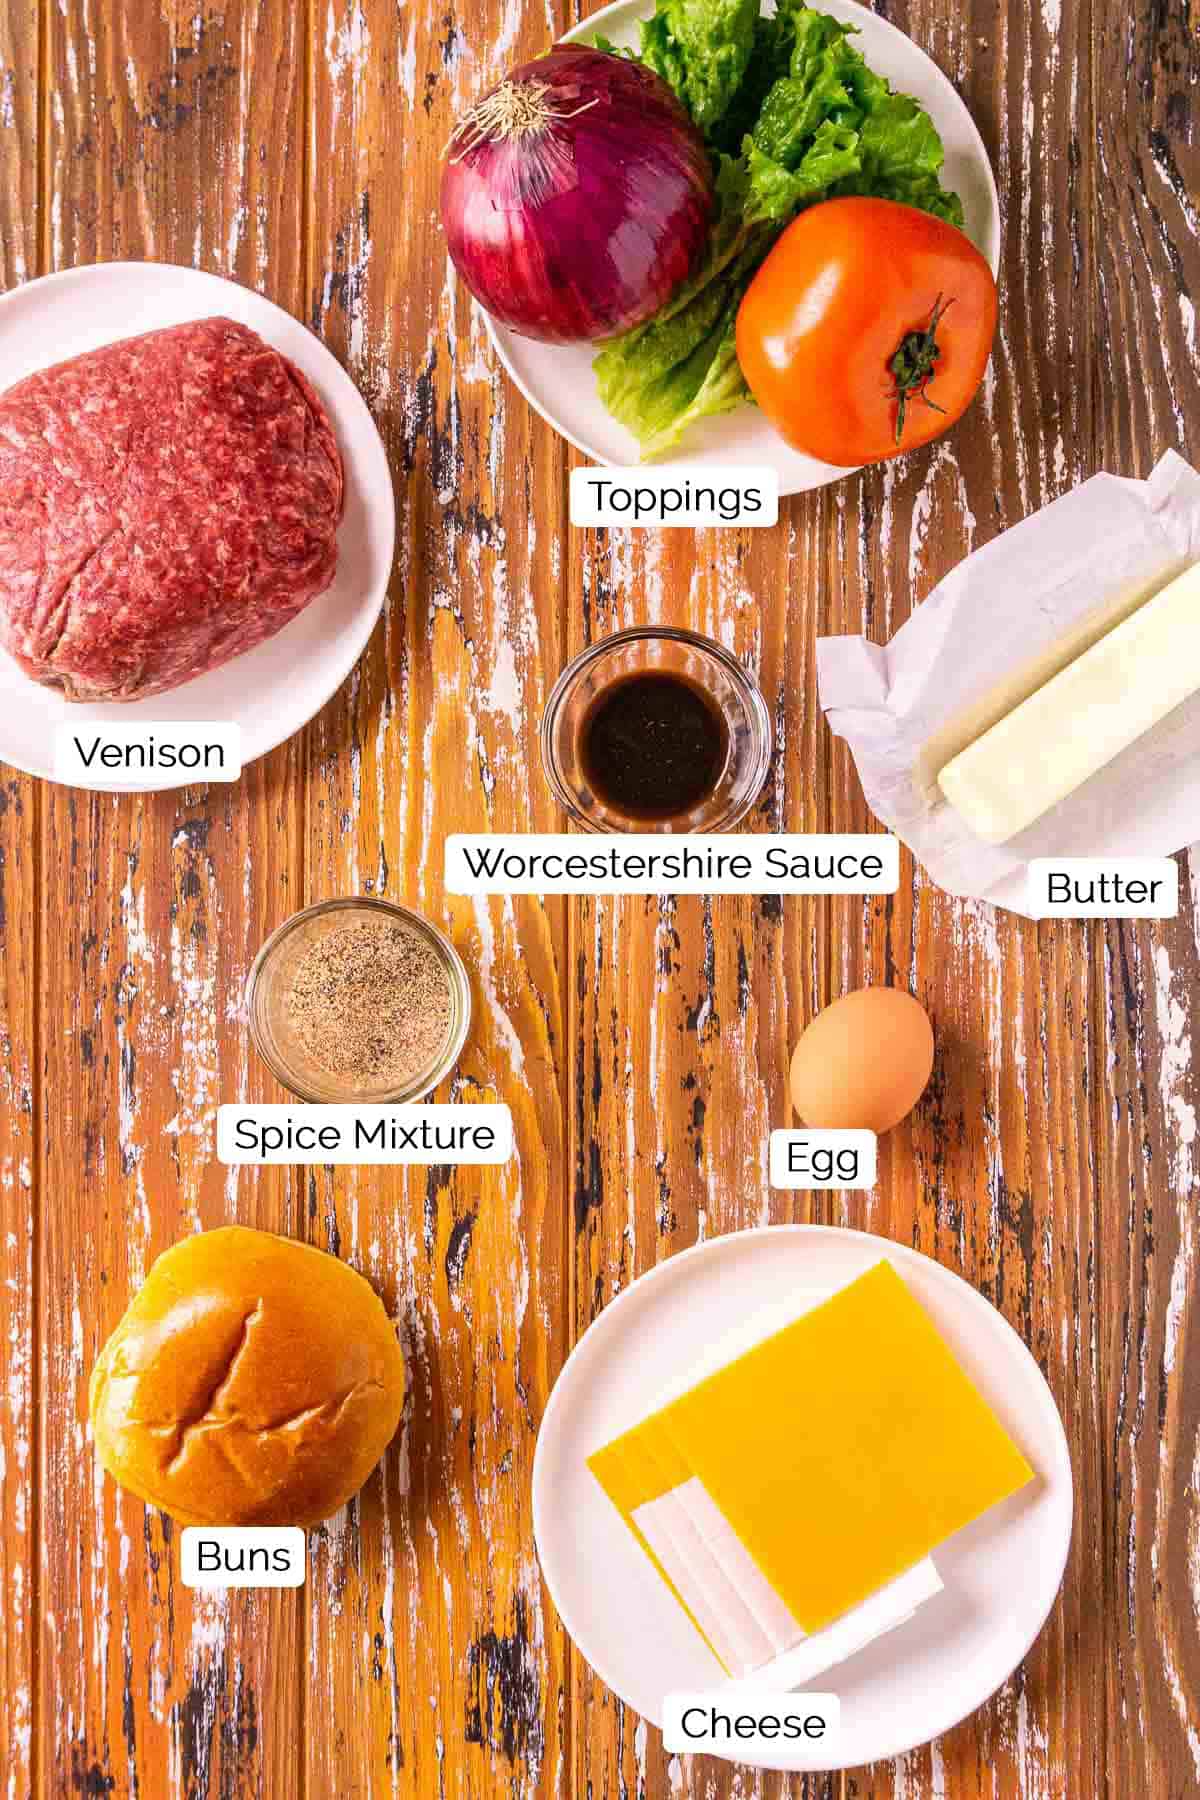 The burger ingredients on a wooden and white surface with black and white labels underneath the various items.